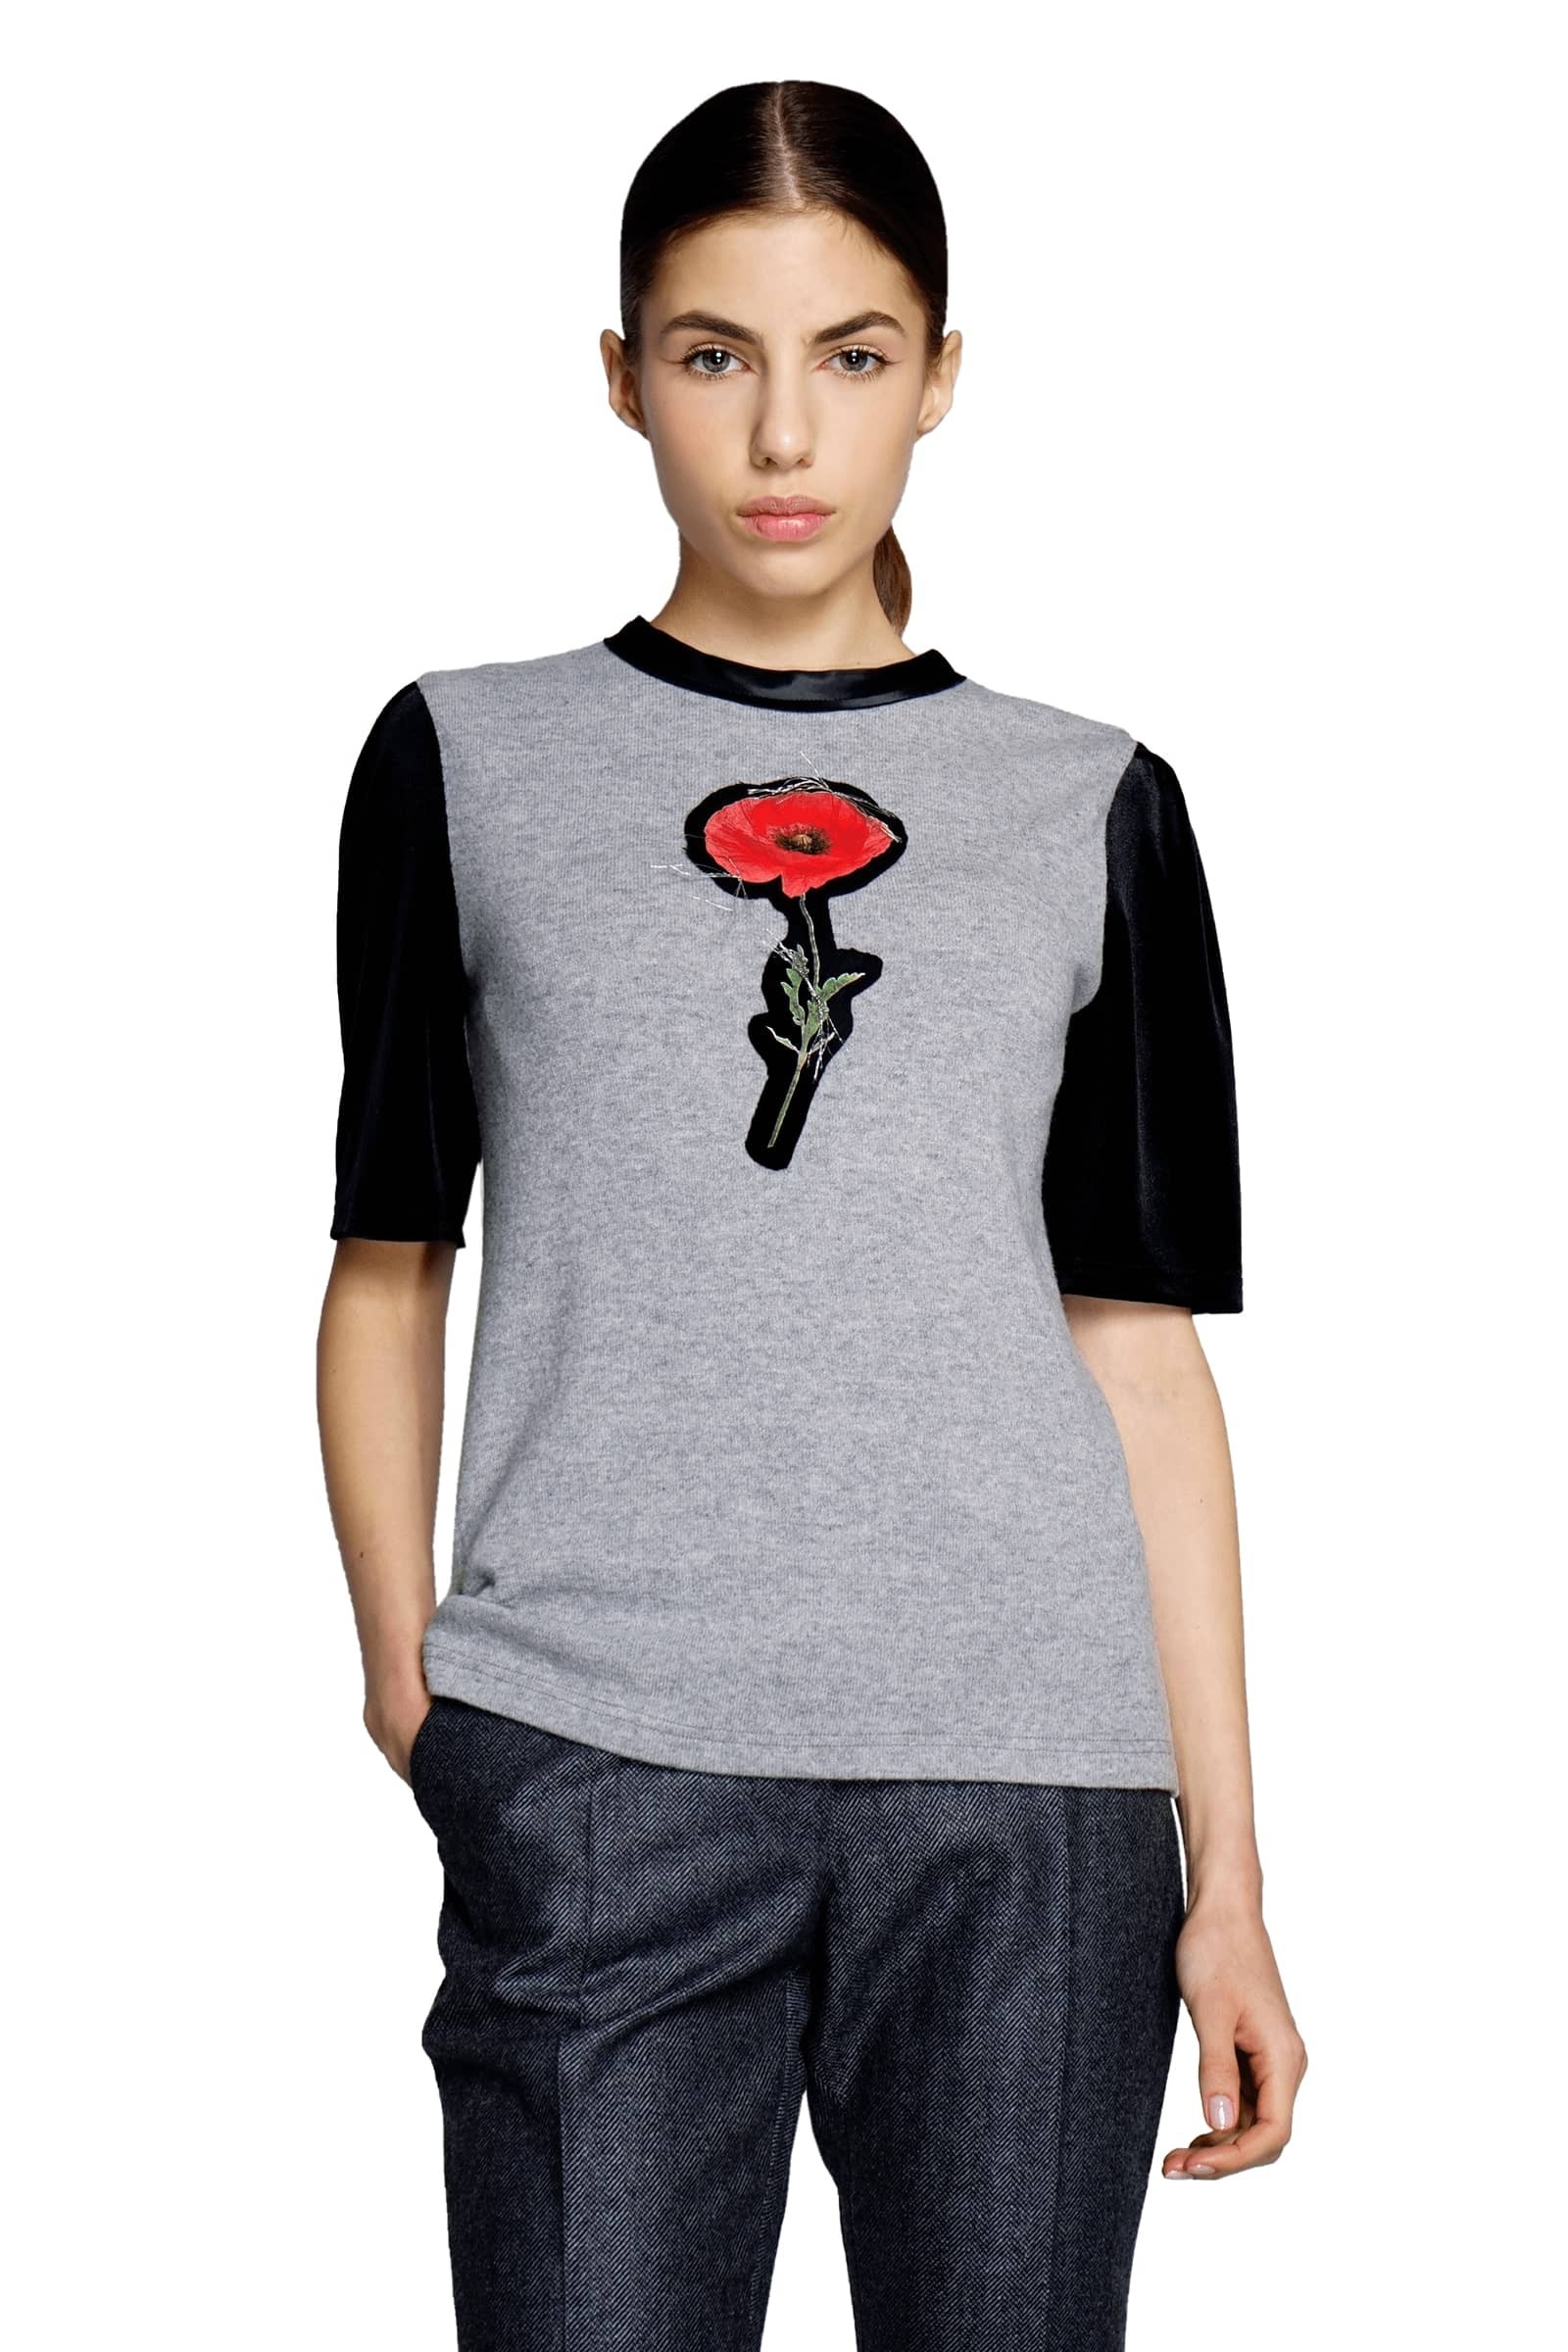 Woolen knit top with poppy